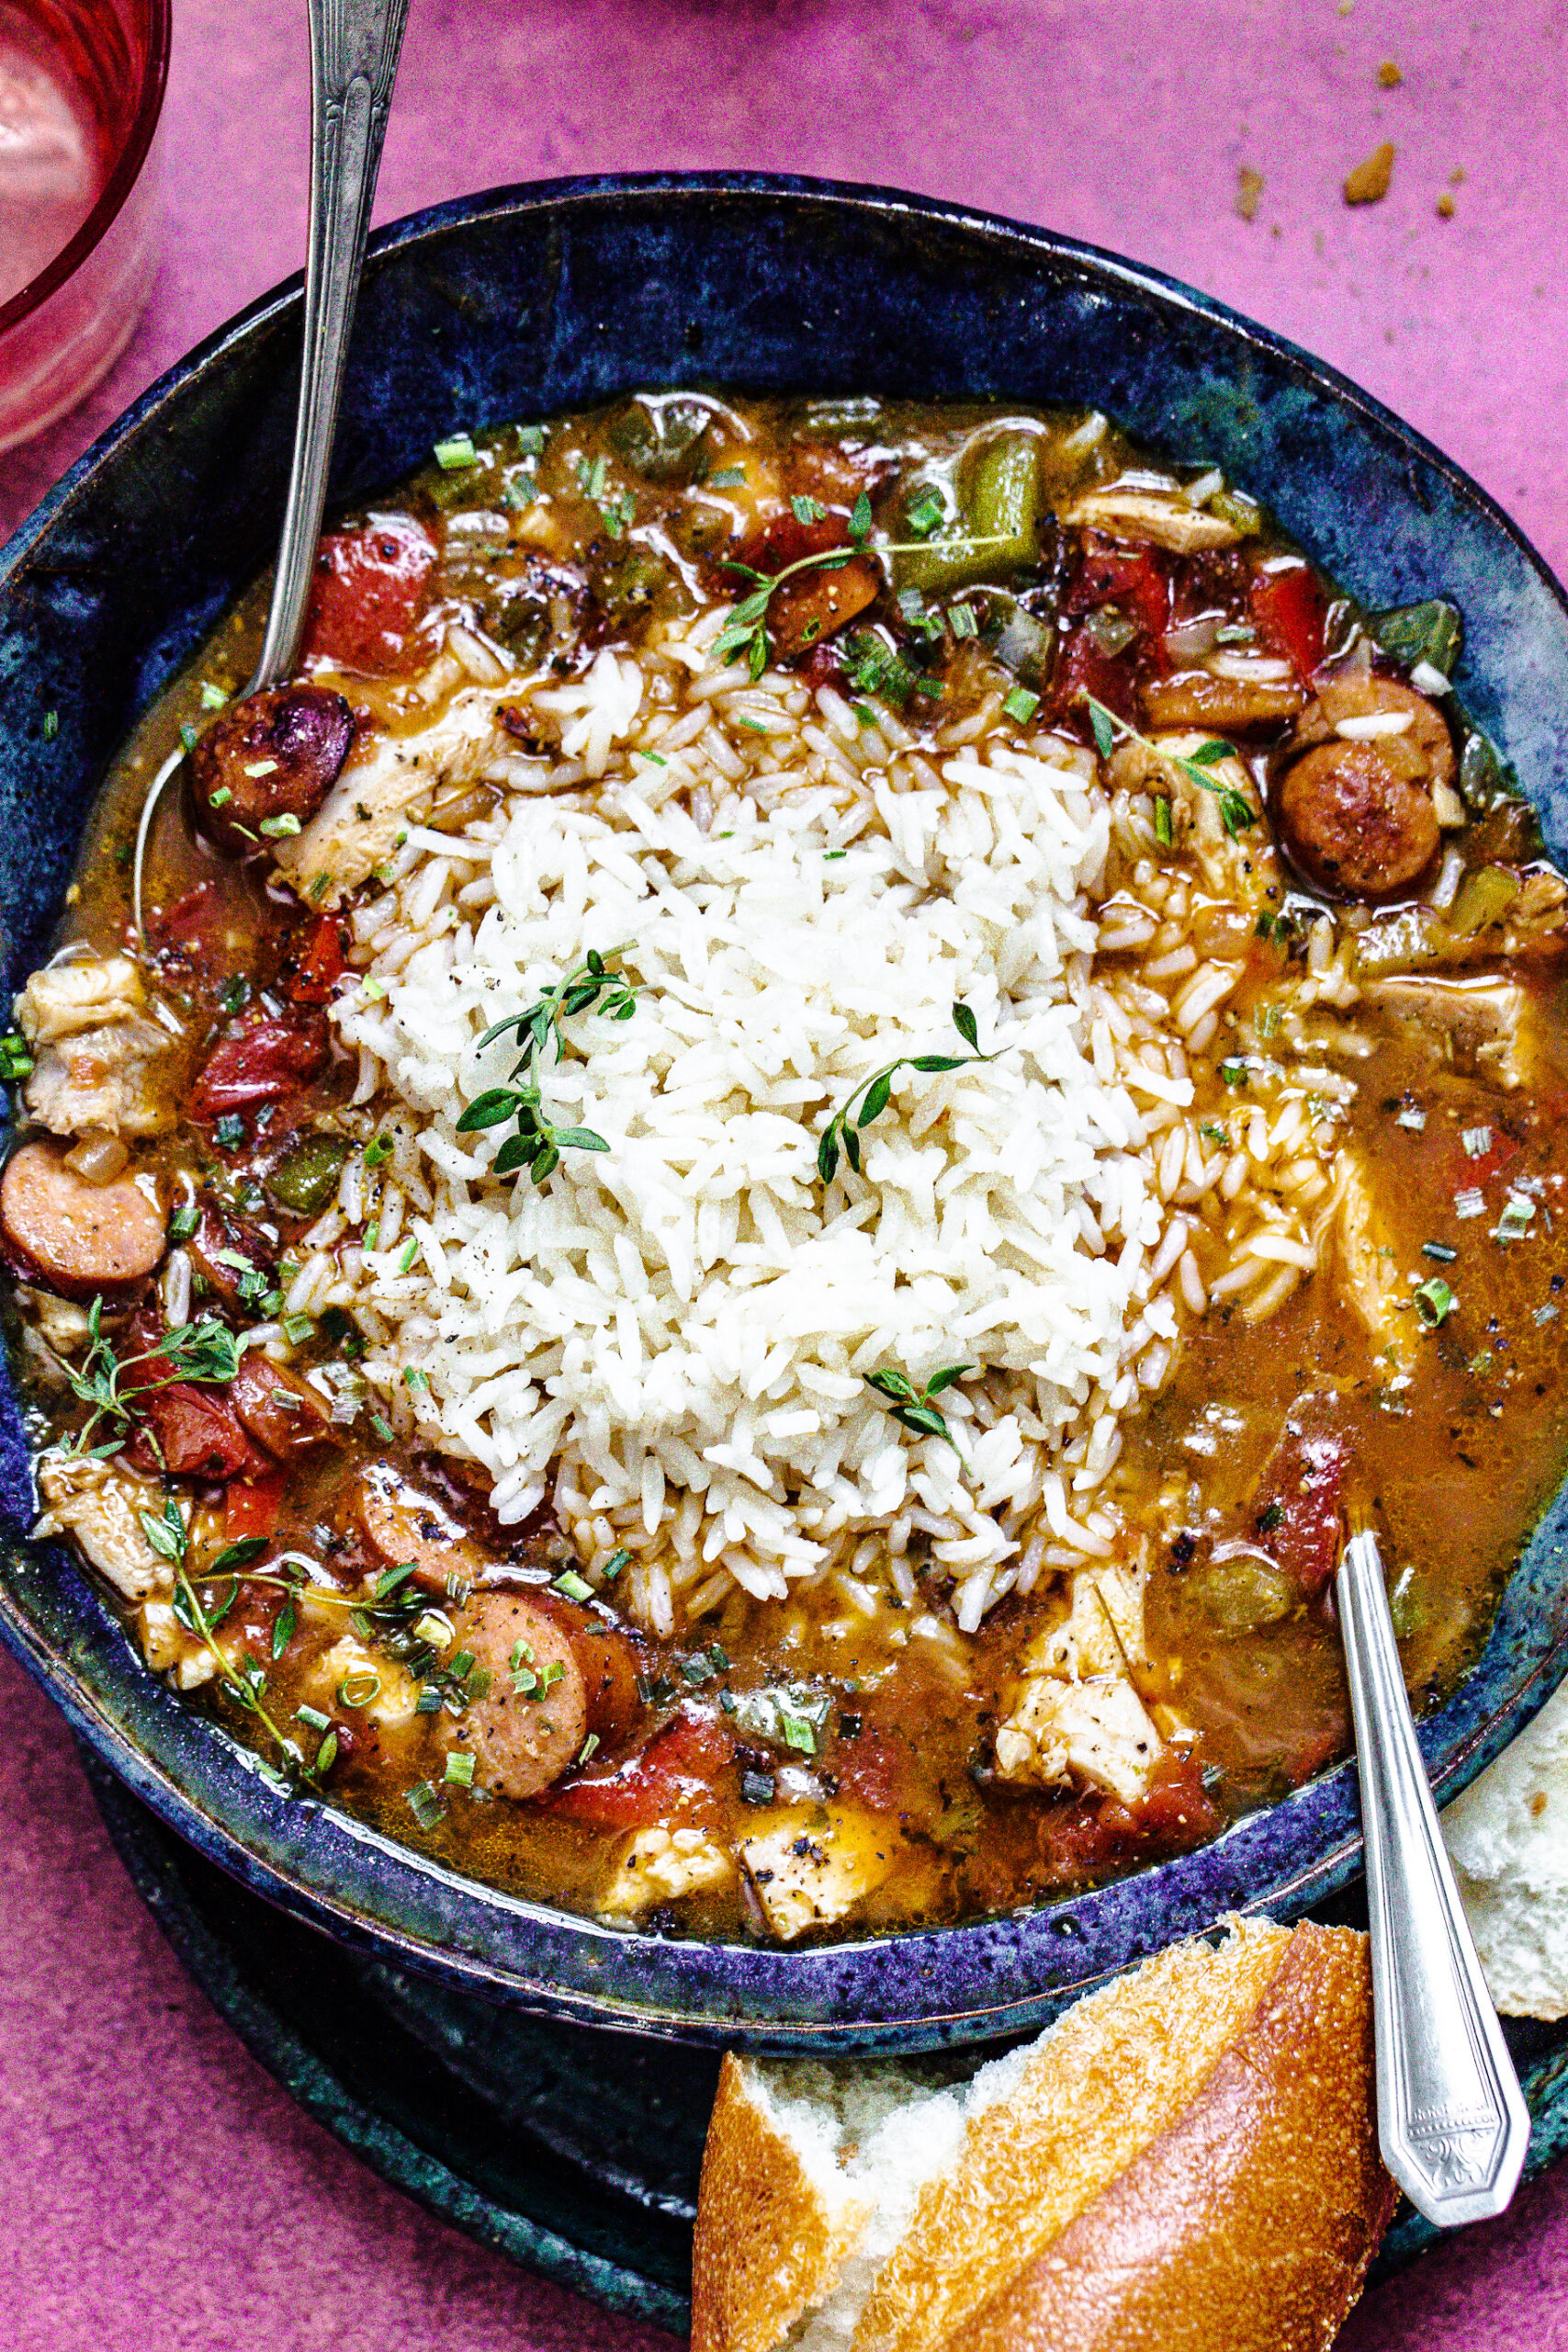 Chipotle-Honey Gumbo with Coconut Rice